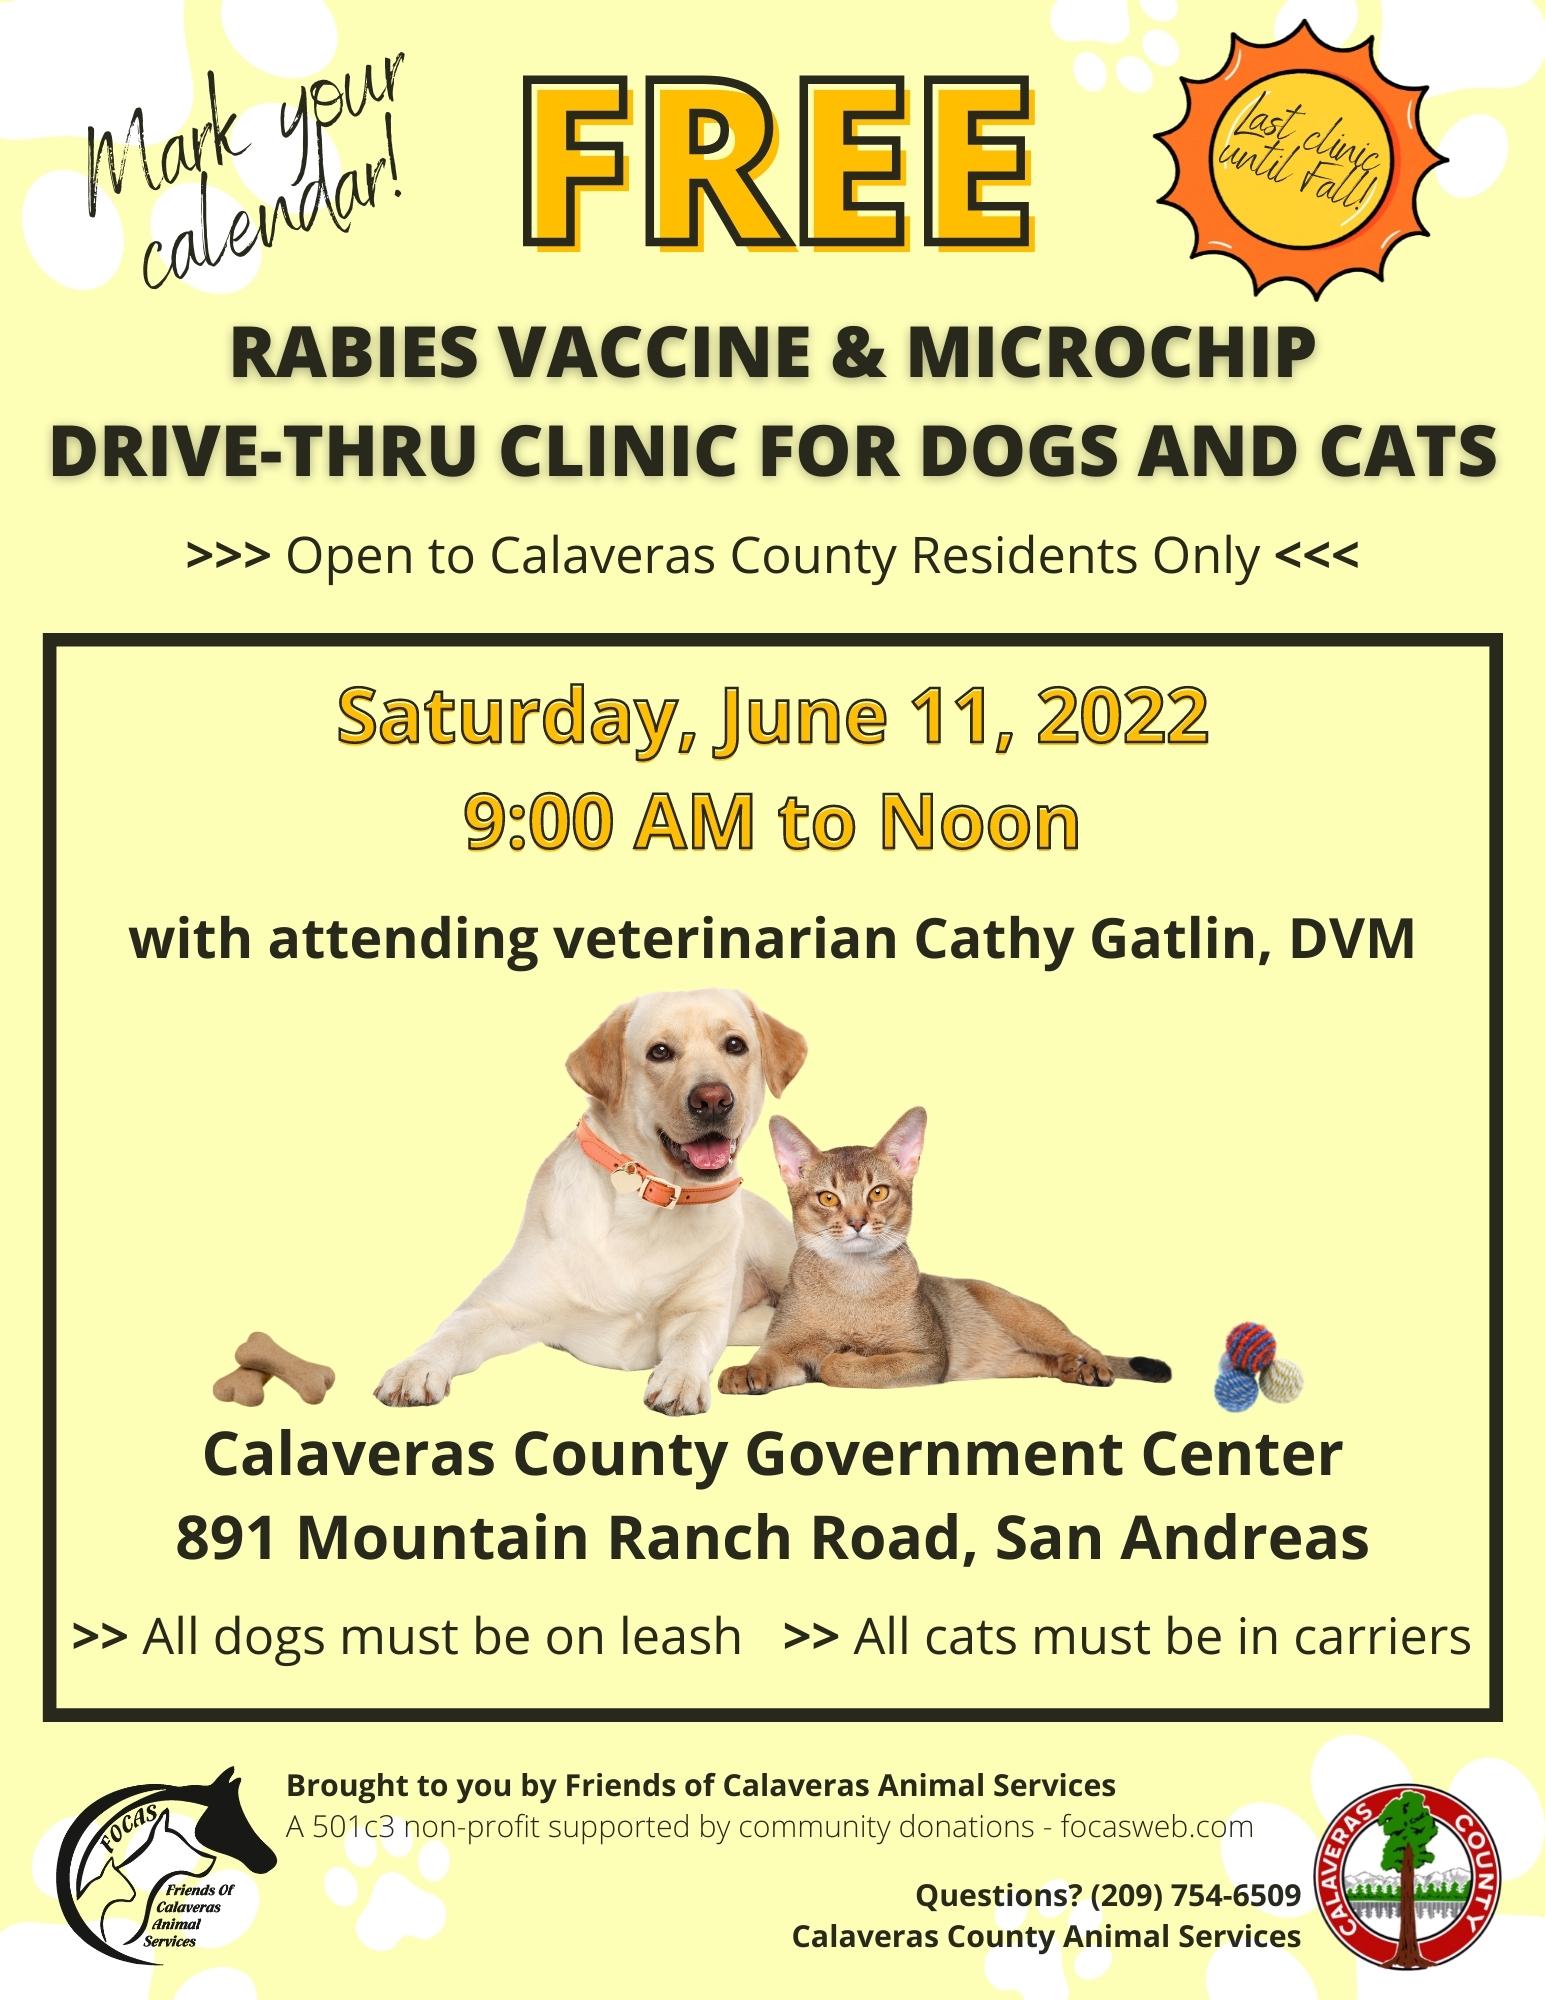 FREE Dog and Cat Rabies Vaccination & Microchipping Clinic - The Pine Tree